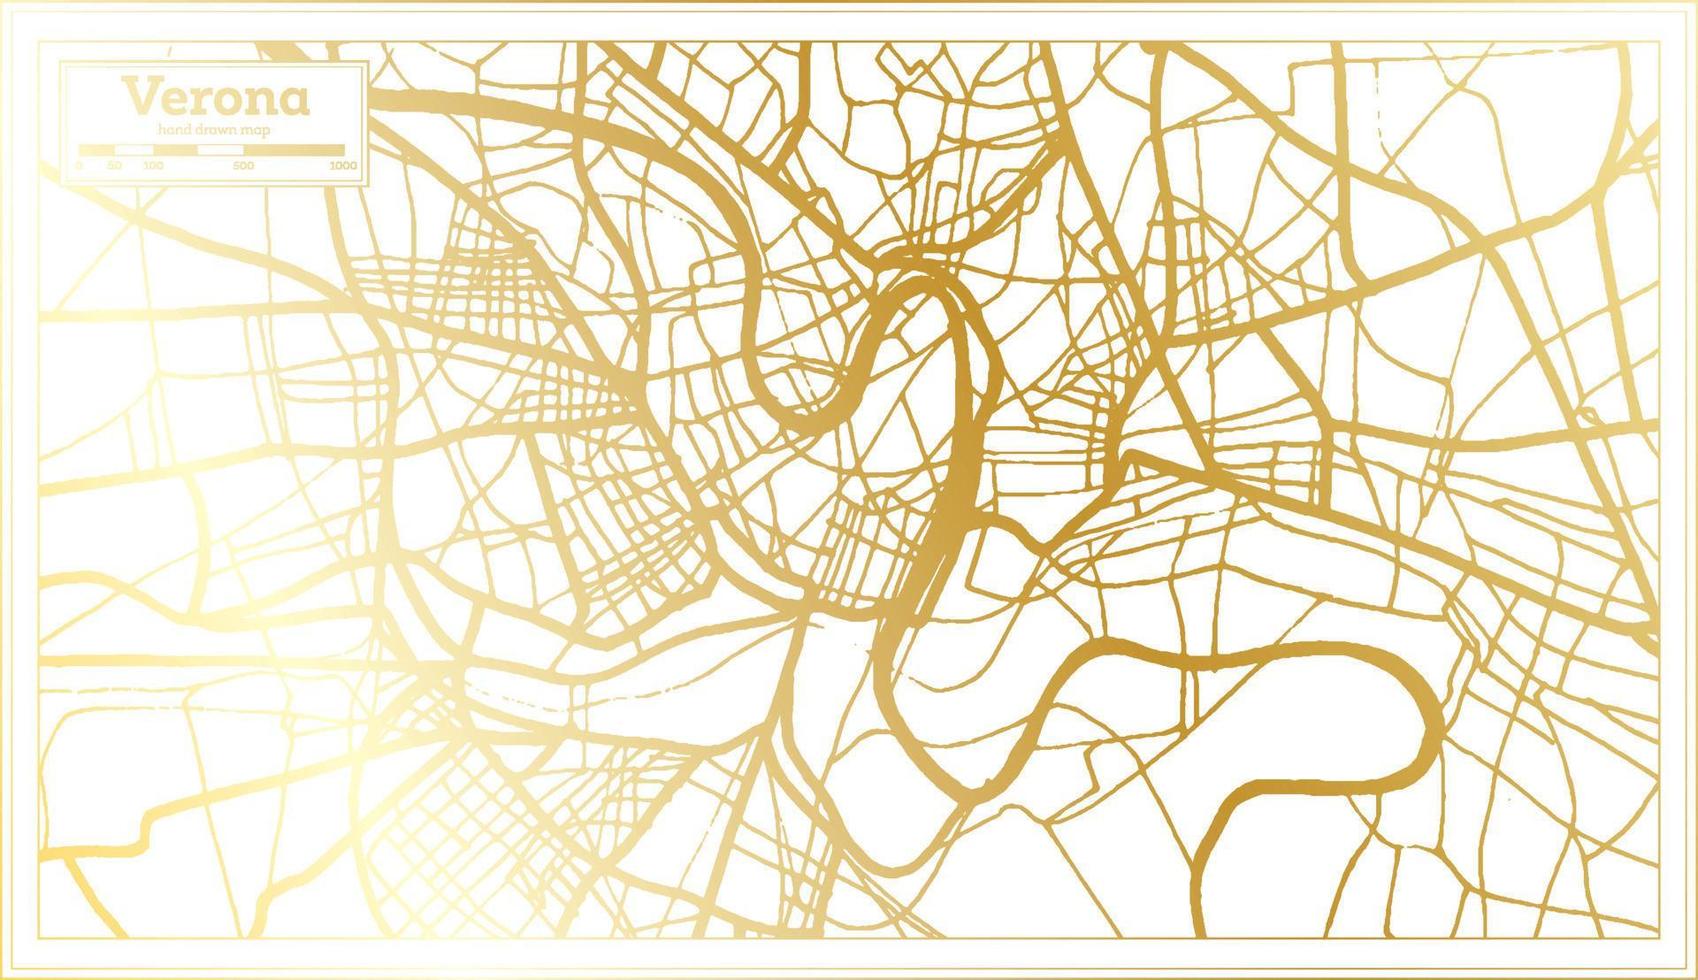 Verona Italy City Map in Retro Style in Golden Color. Outline Map. vector